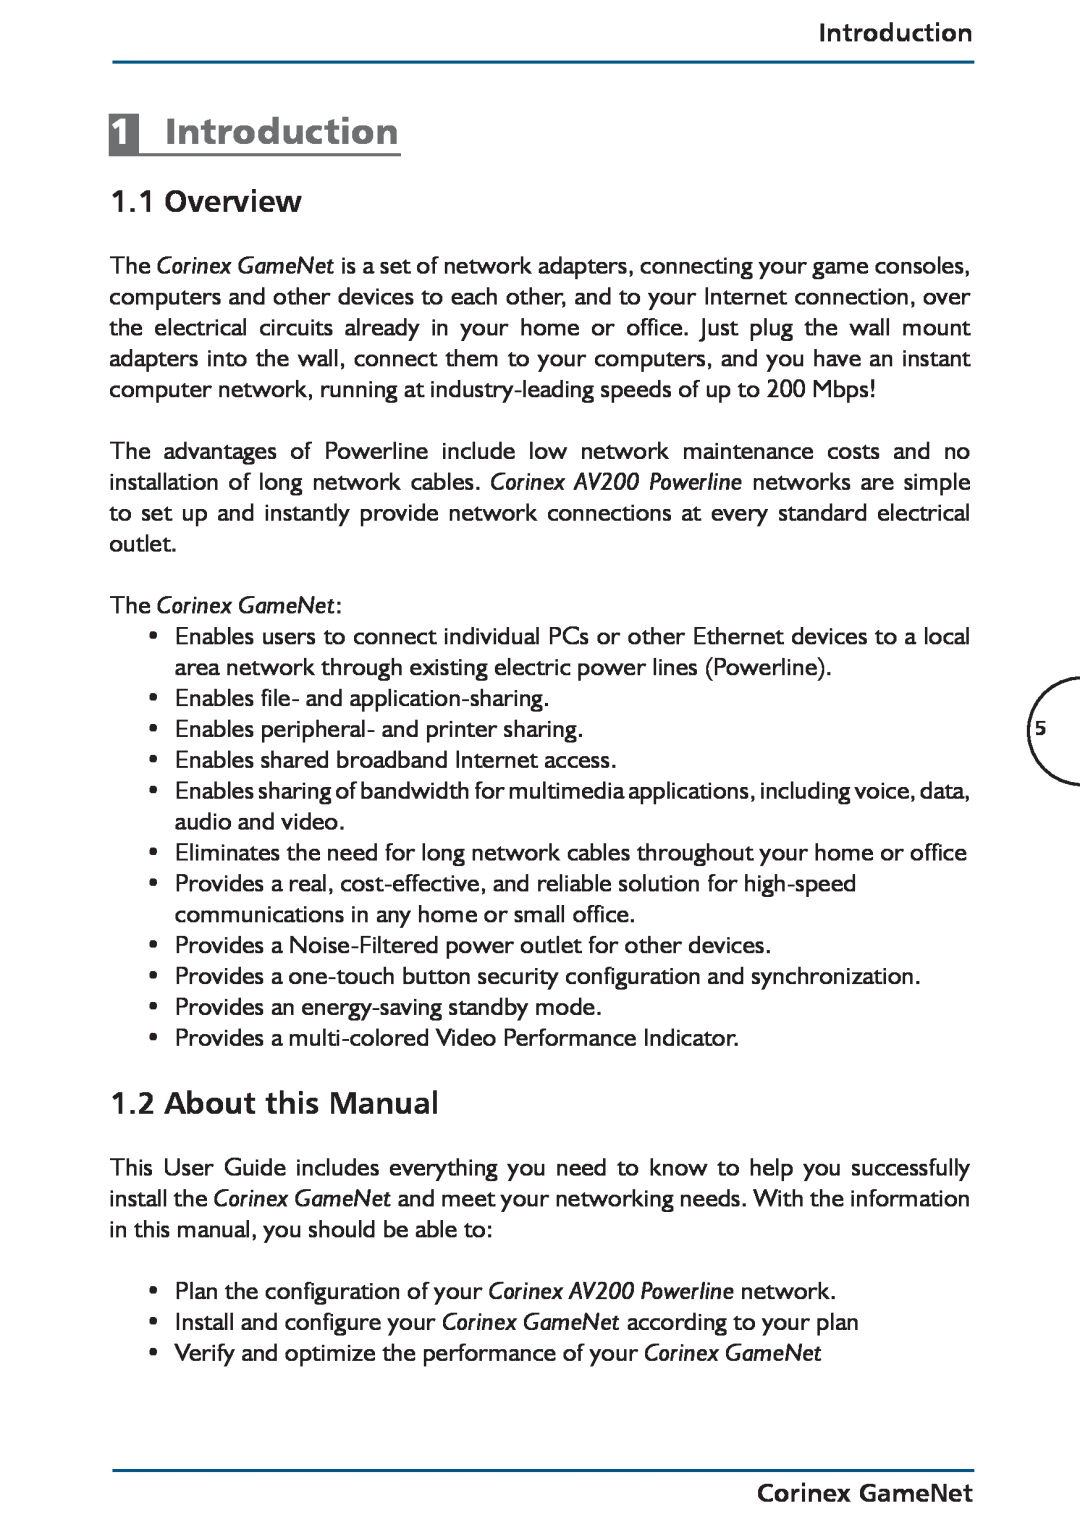 Corinex Global Introduction, Overview, About this Manual, Enables peripheral- and printer sharing, Corinex GameNet 